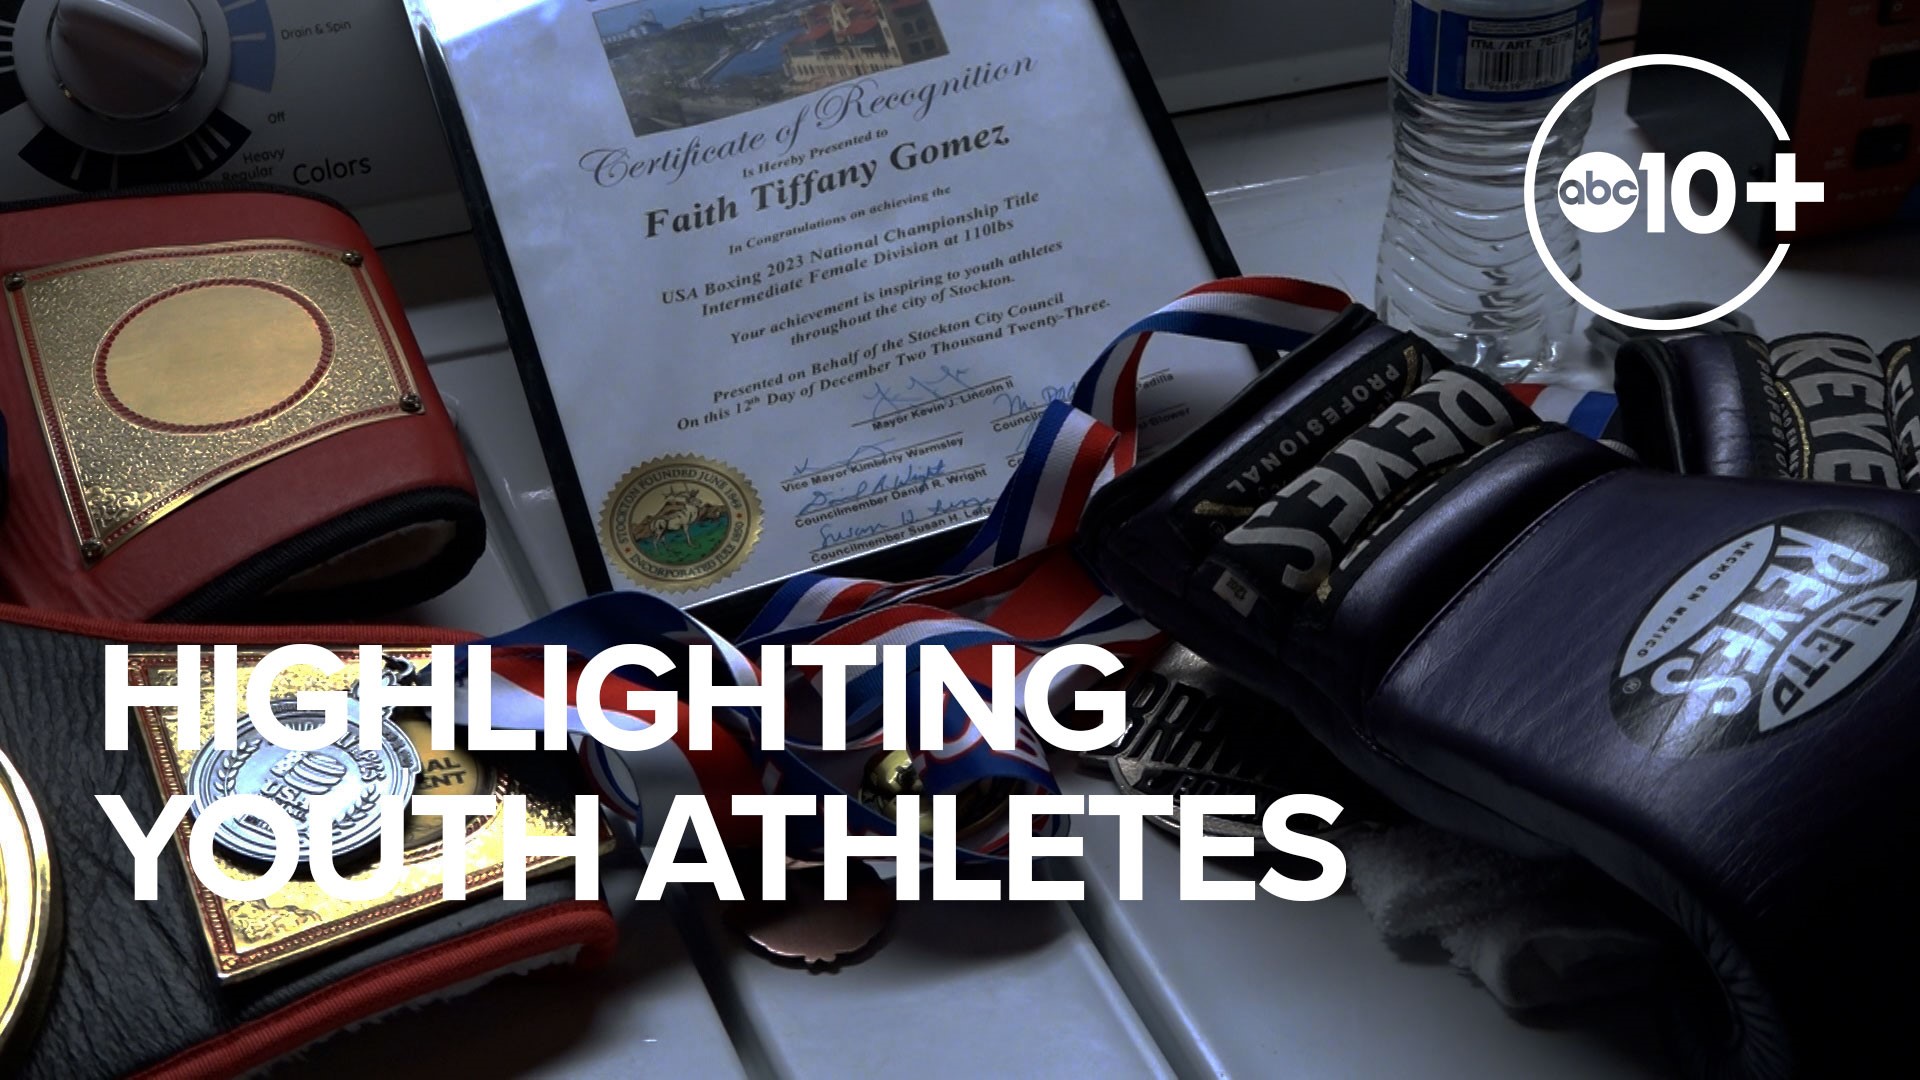 In this episode, we meet a handful of youth athletes in Northern California making a name for themselves on the mat and on the field.